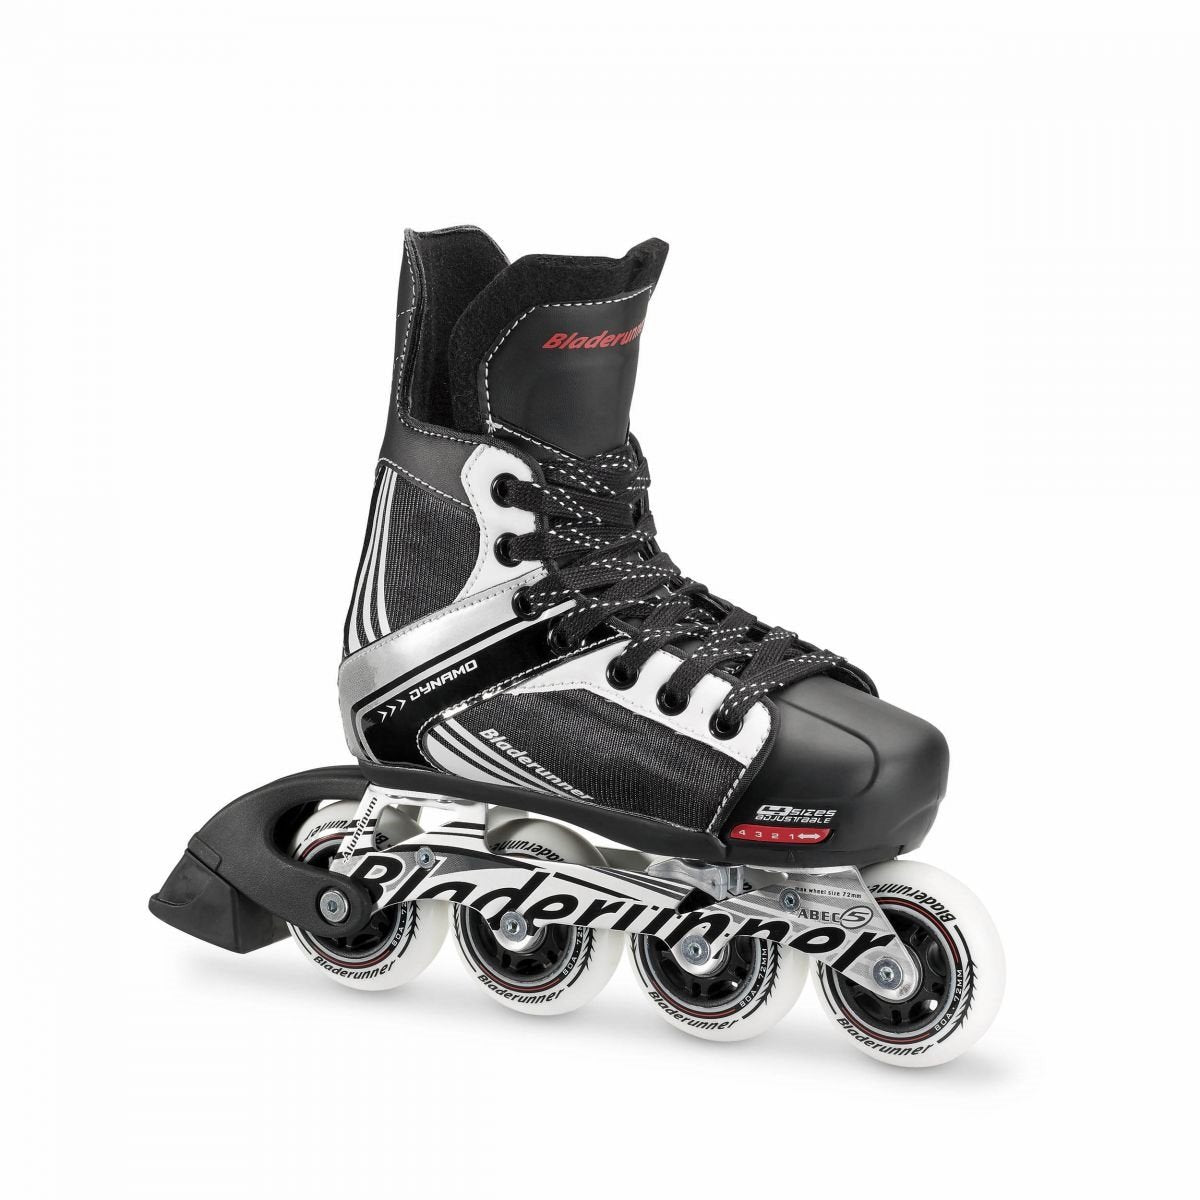 Shop Rollerblade's Junior Dynamo Inline Recreational Skate, Adjustable Kids Roller Blade. The roller blade is black with white and silver detailing.